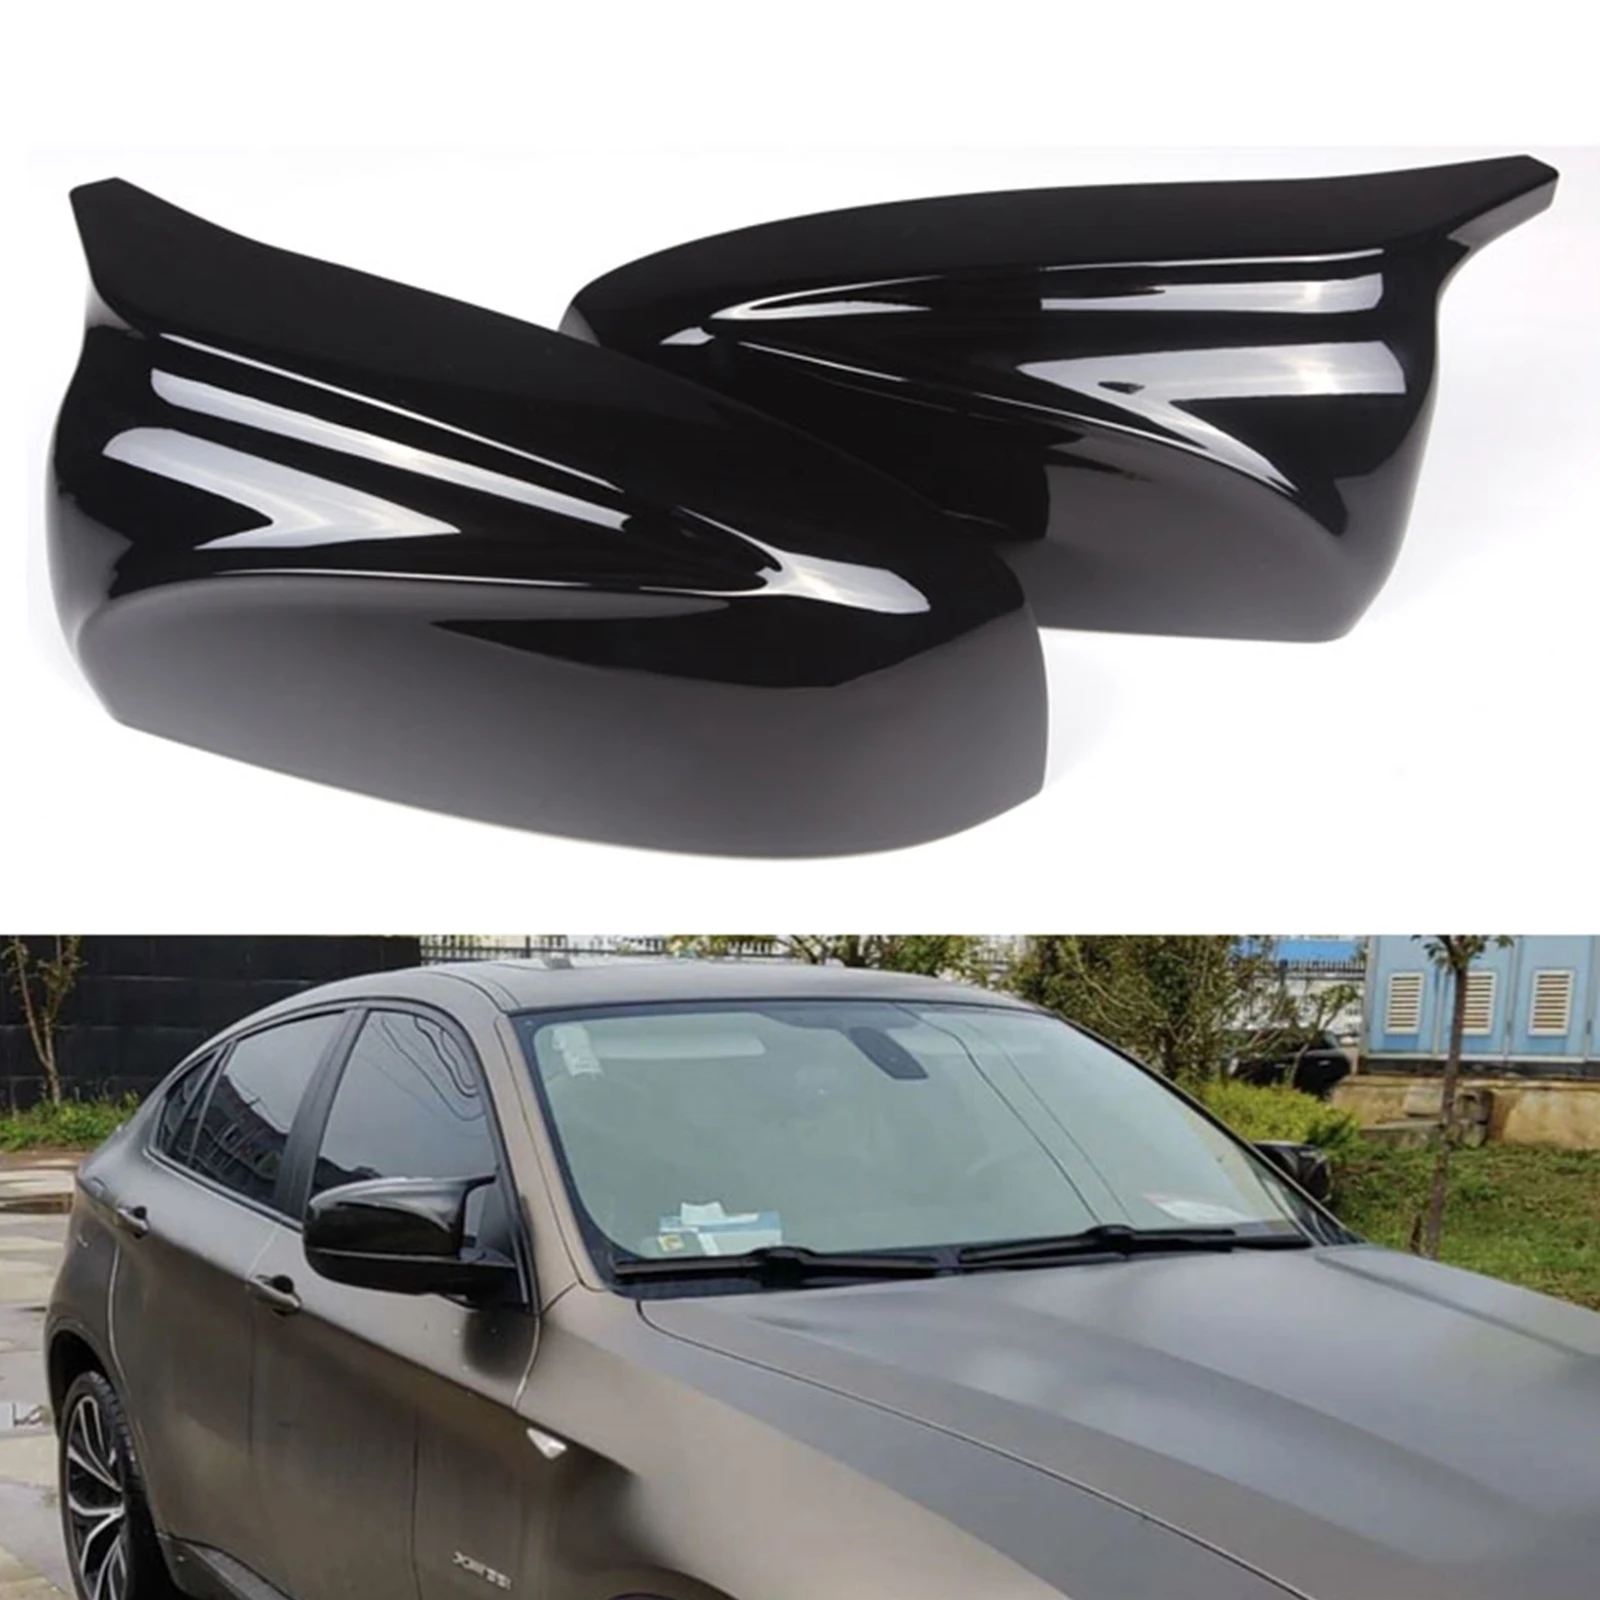 

Gloss Black Mirror Cover For BMW X5 X6 E70 E71 2007-2013 LHD Car Exterior Rearview Replacement Rear View Case Reverse Caps Shell